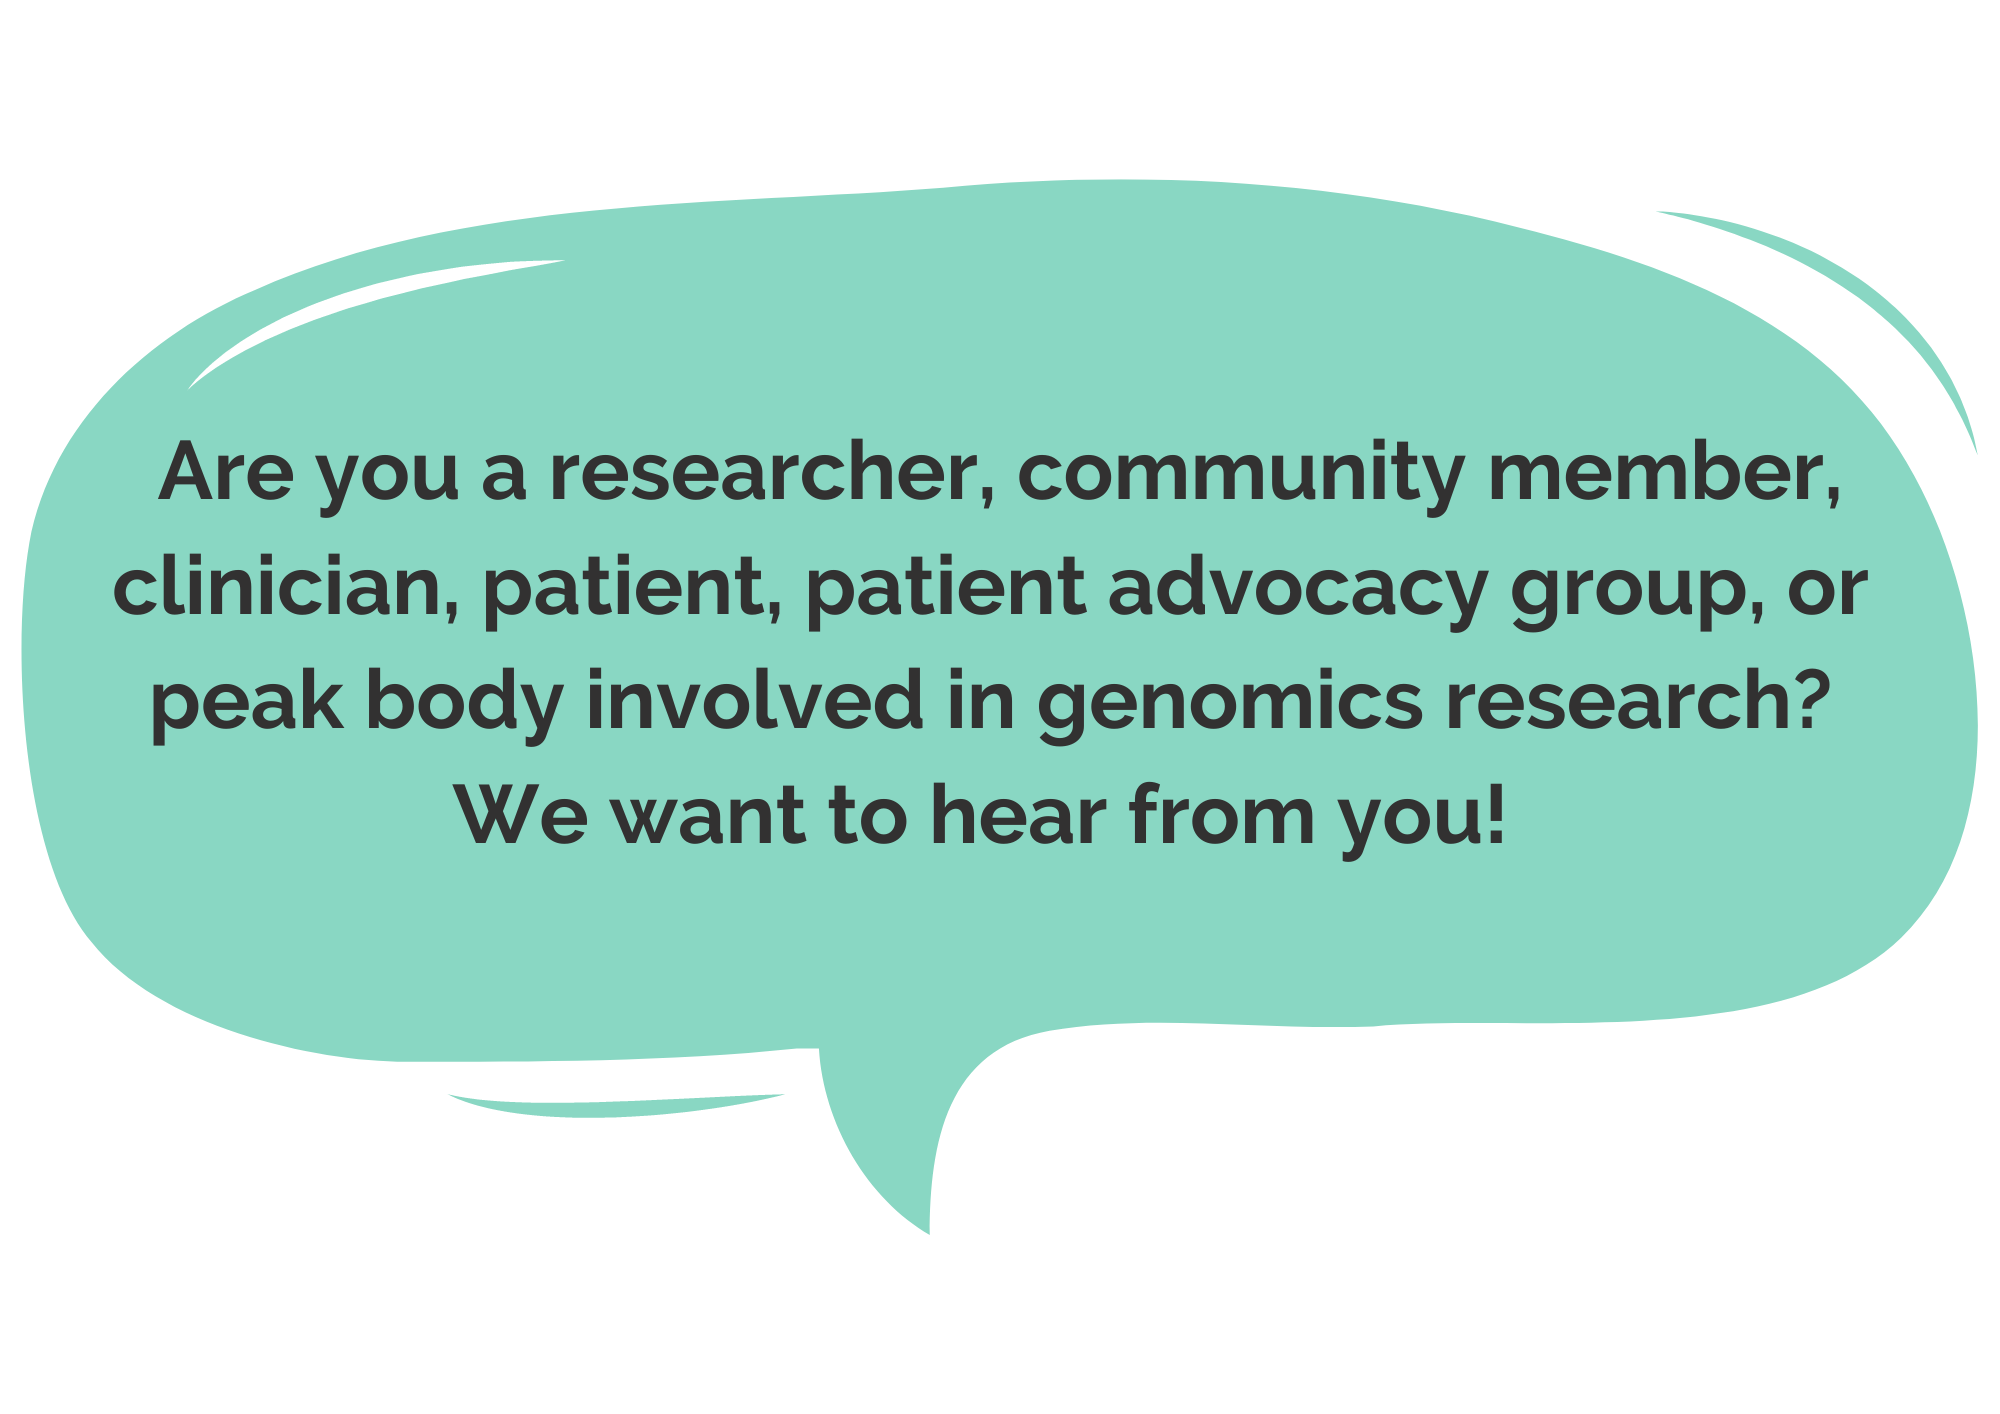 Are you a researcher, community member, clinician, patient, patient advocacy group or peak body involved in genomics research? We want to hear from you!